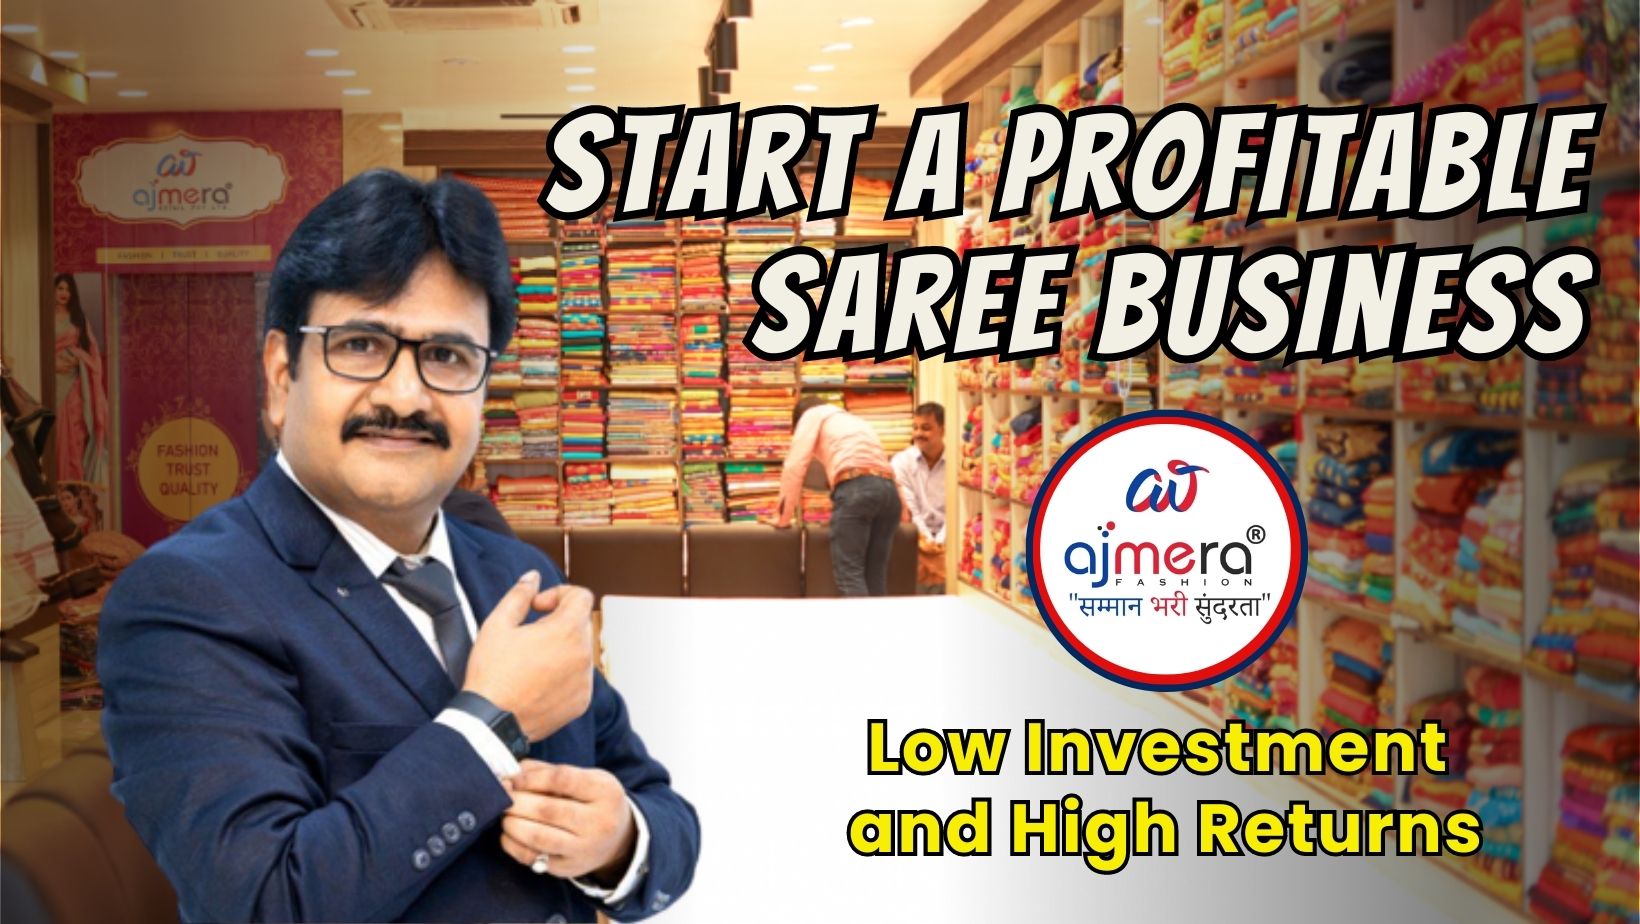 Ajmera Fashion Franchise Best Saree Business Opportunities